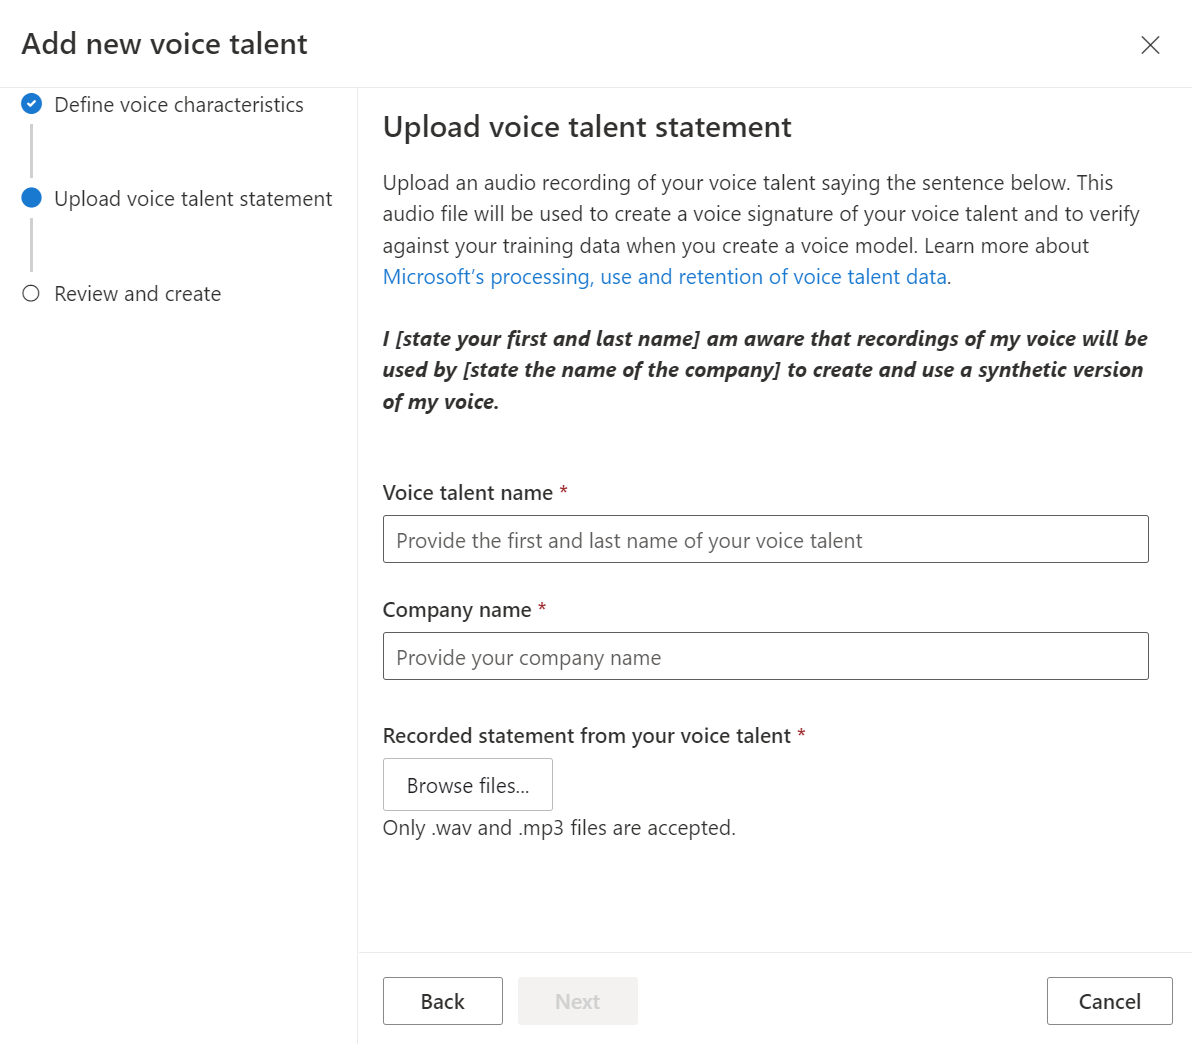 Screenshot that shows the upload voice talent statement.